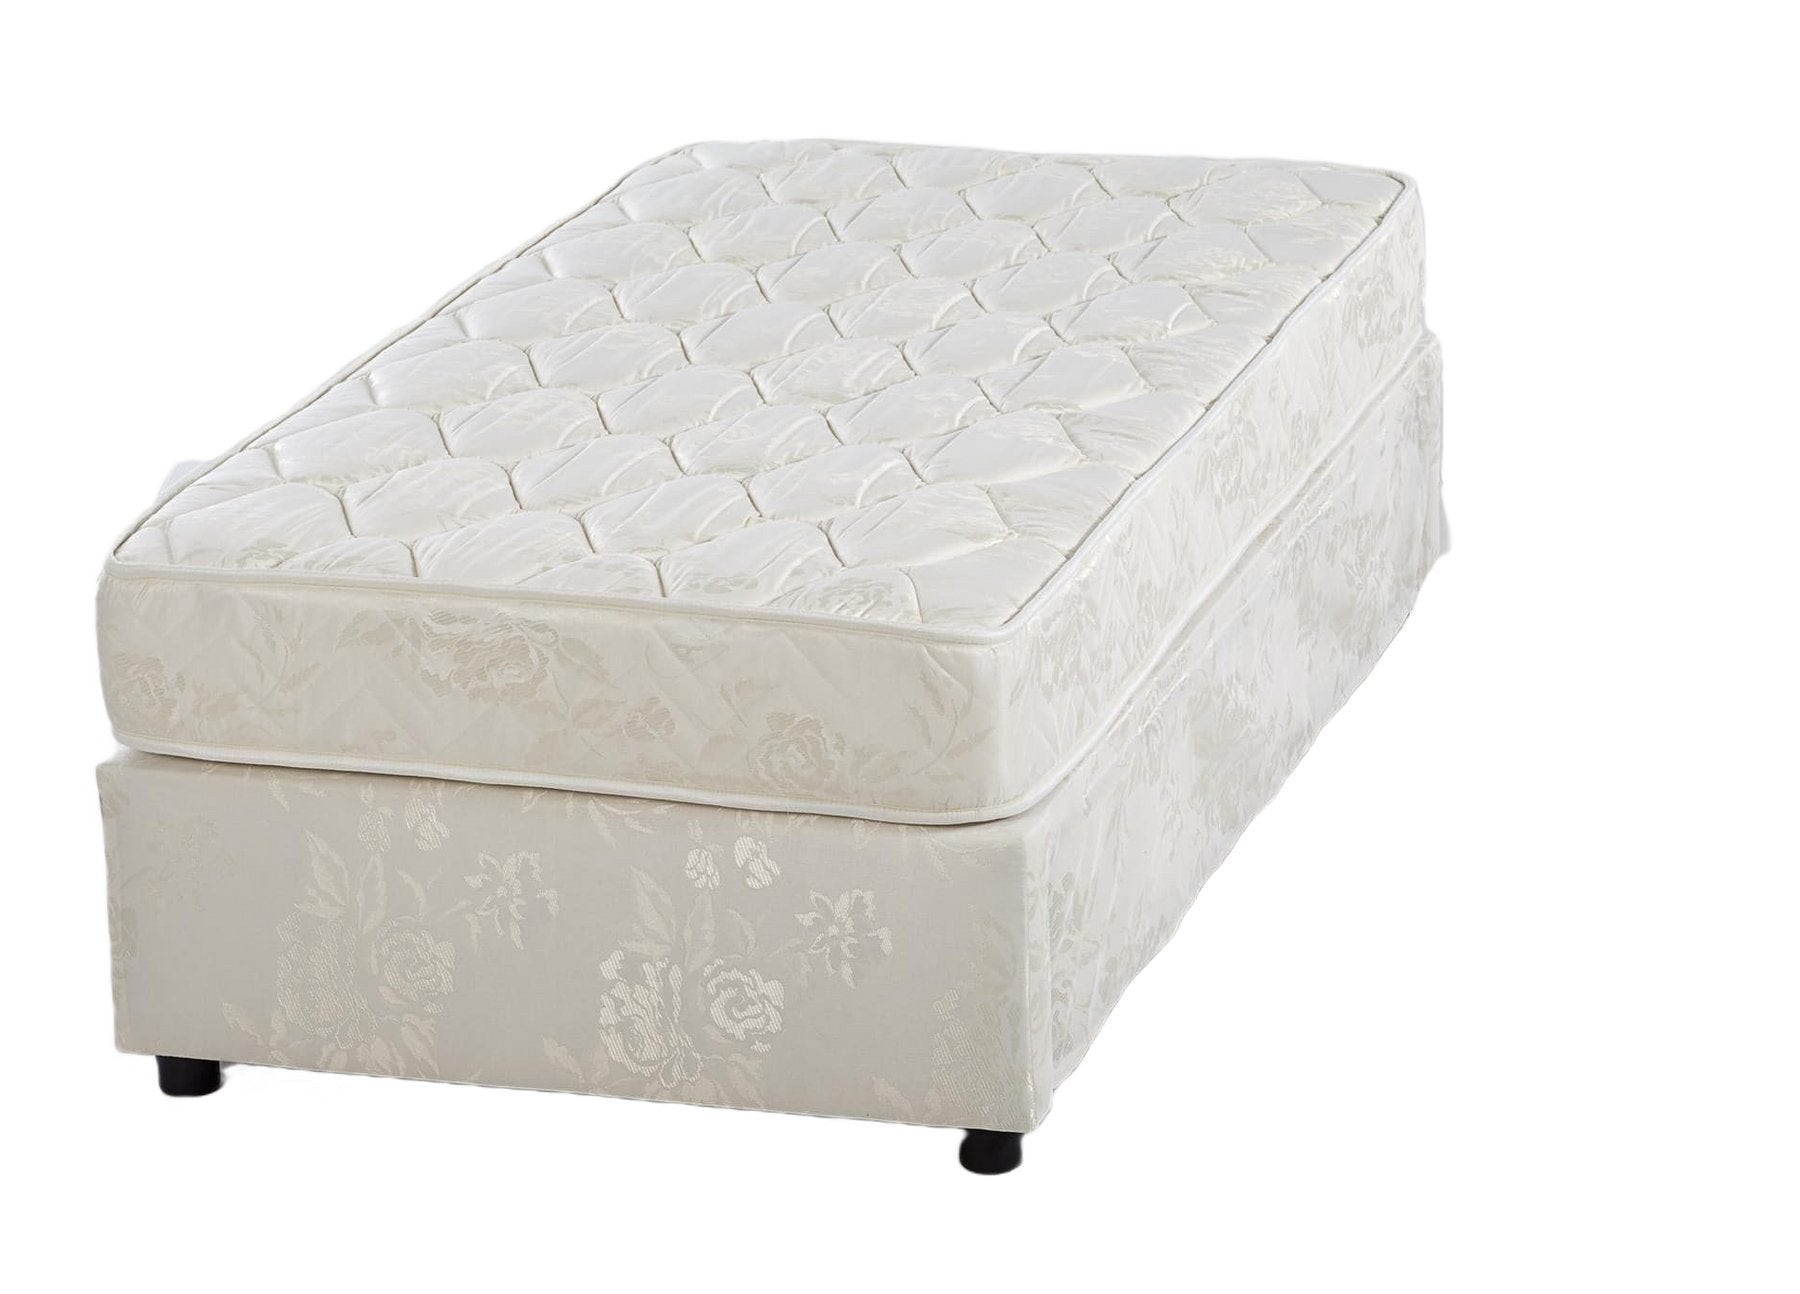 Alize High Rise With Extra Mattress by Bellona